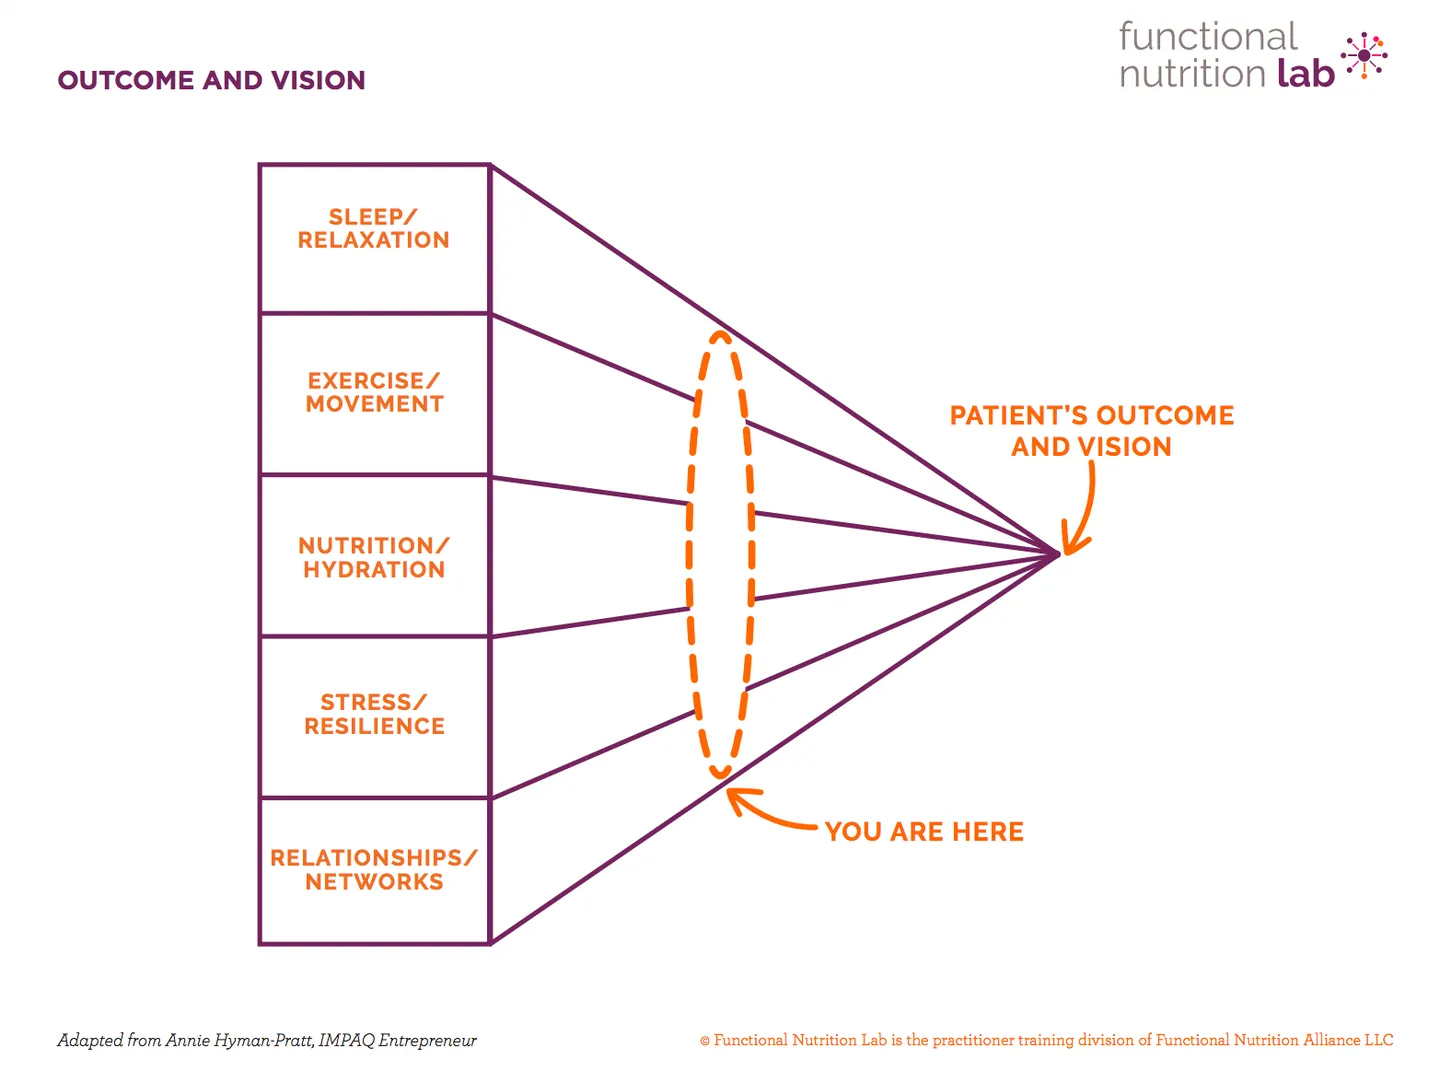 Your client's outcome and vision by Andrea Nakayama for Functional Nutrition Lab